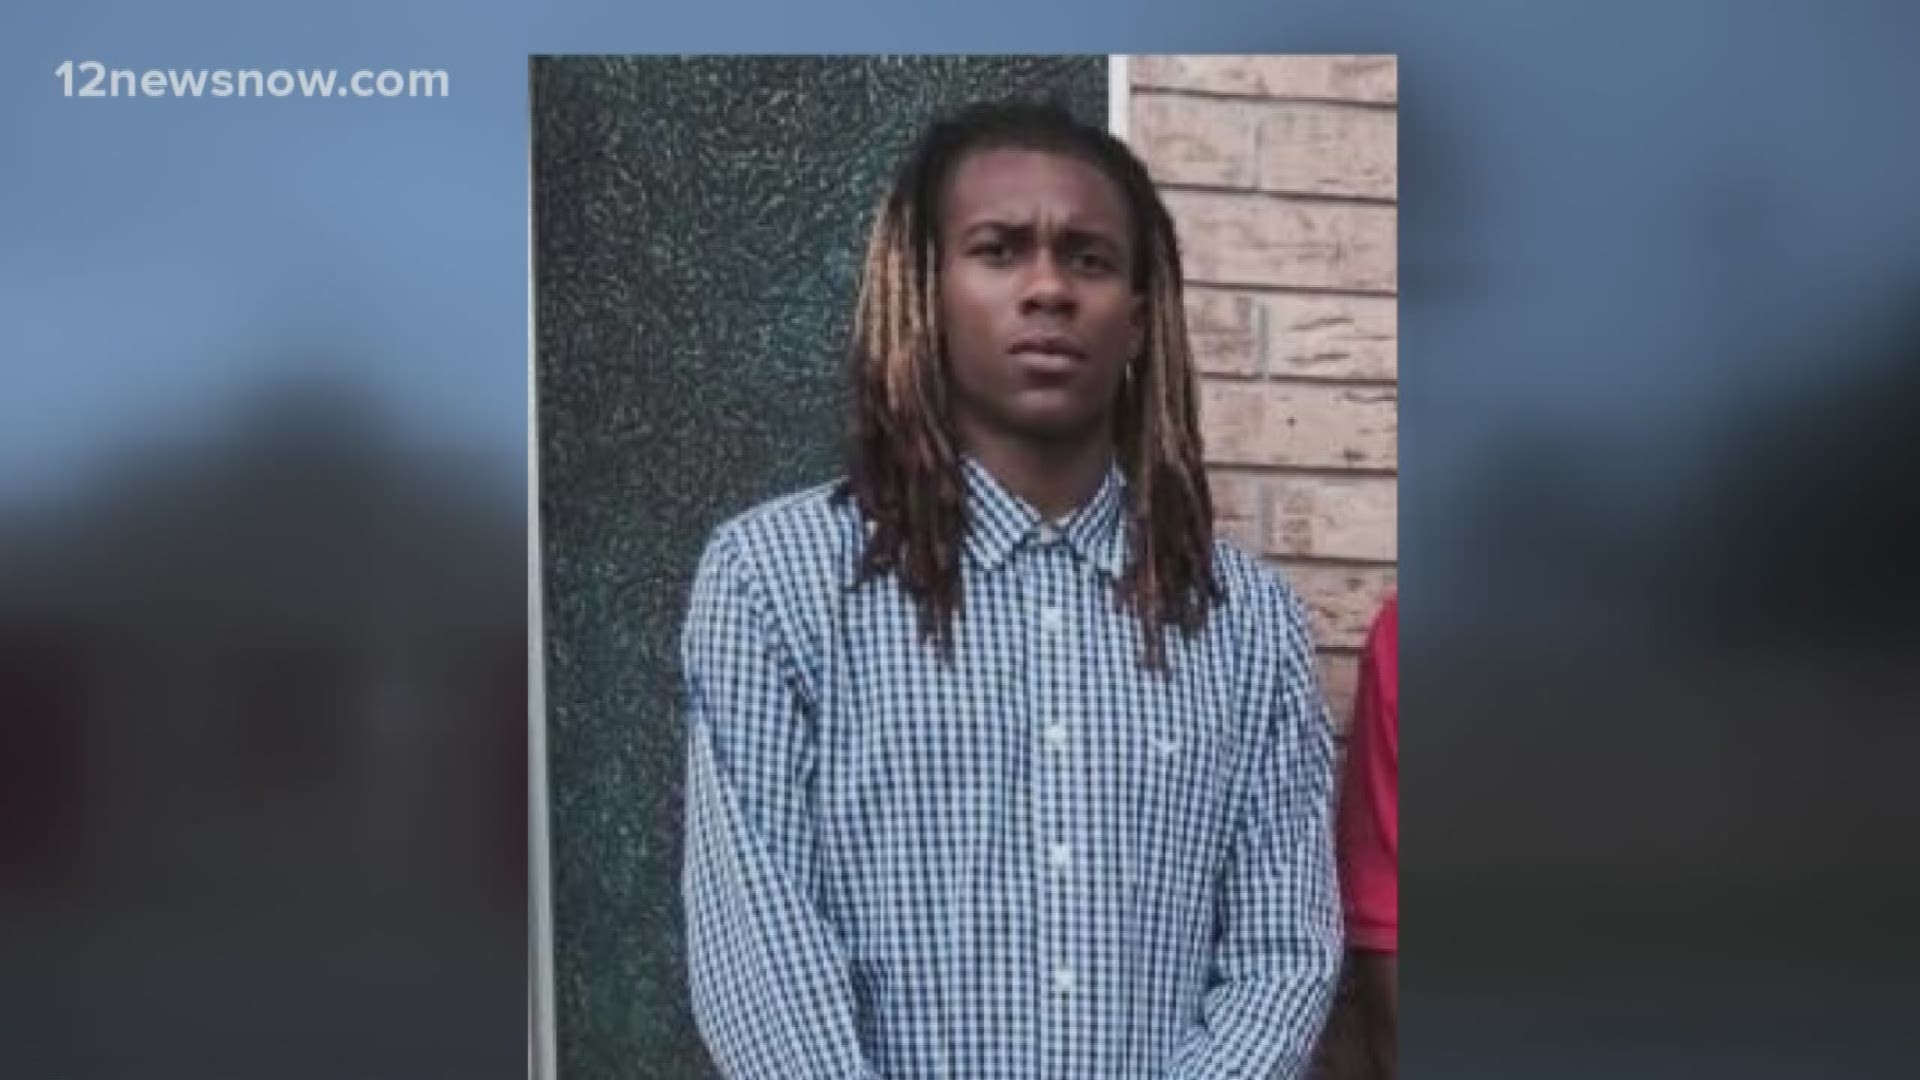 Christopher Spikes, 22, was found dead just before 9:30 p.m. Friday, with a gunshot wound to the back of his head.